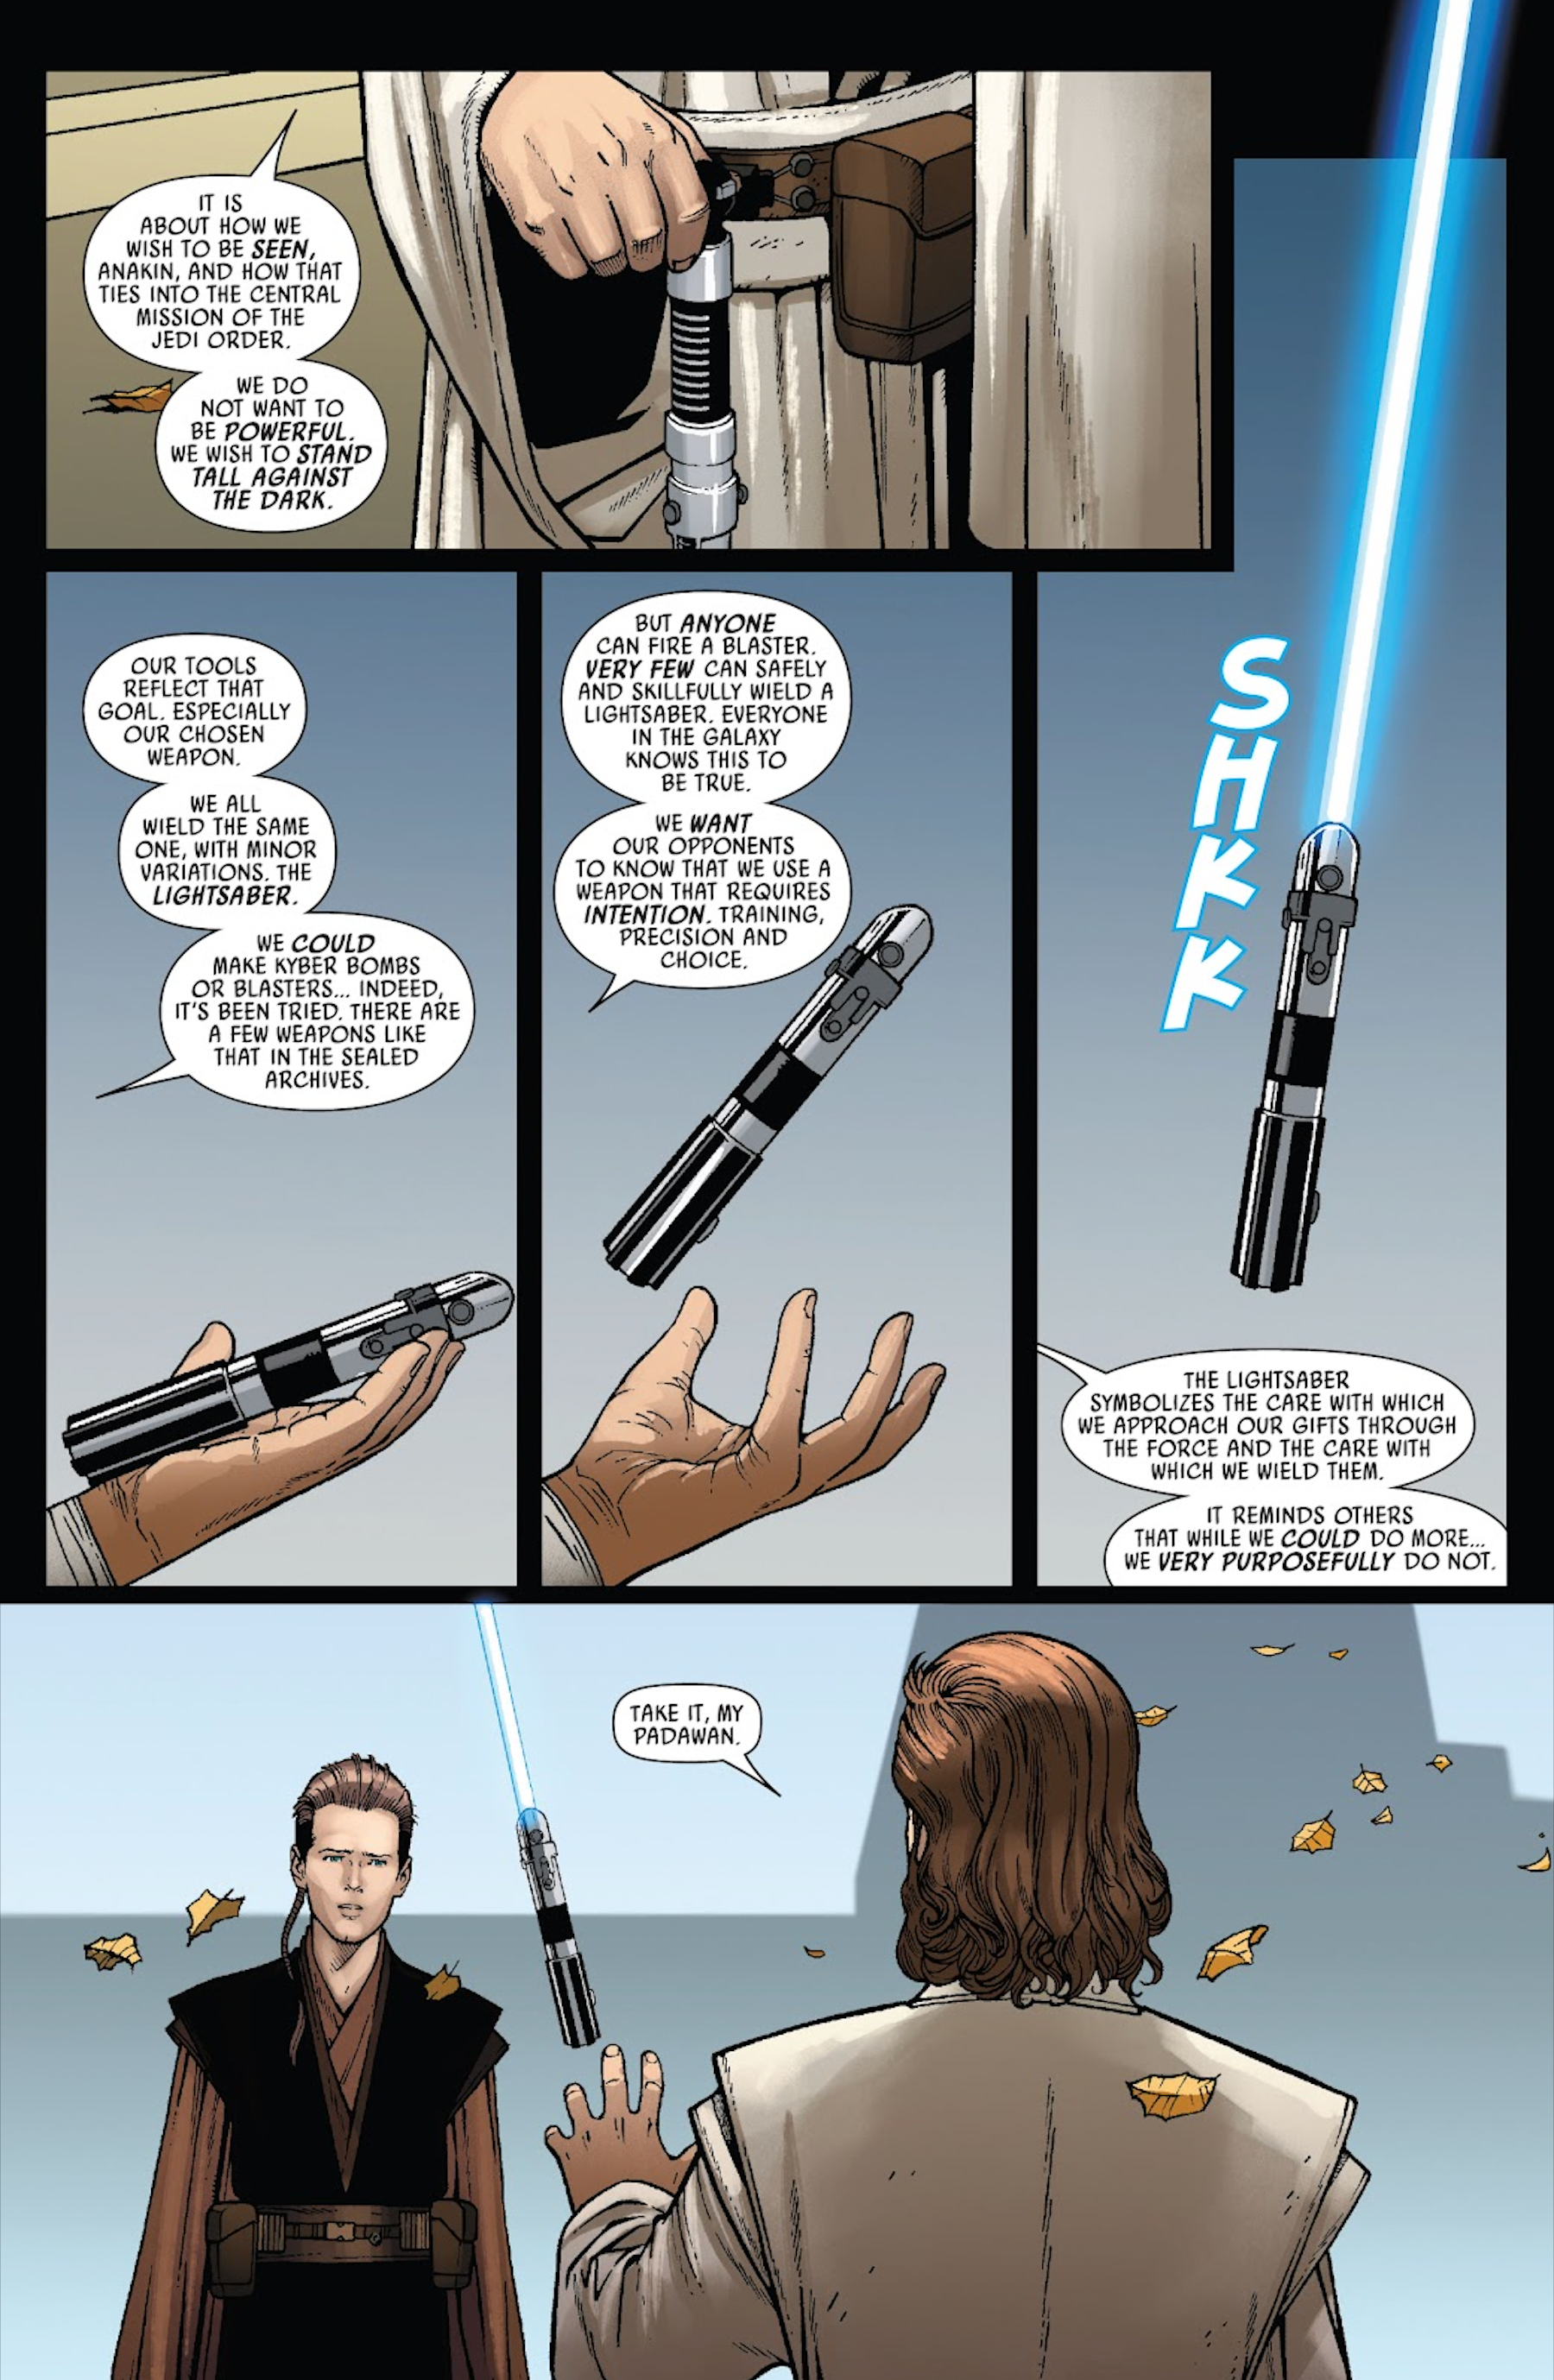 Why Jedi use lightsabers in Star Wars